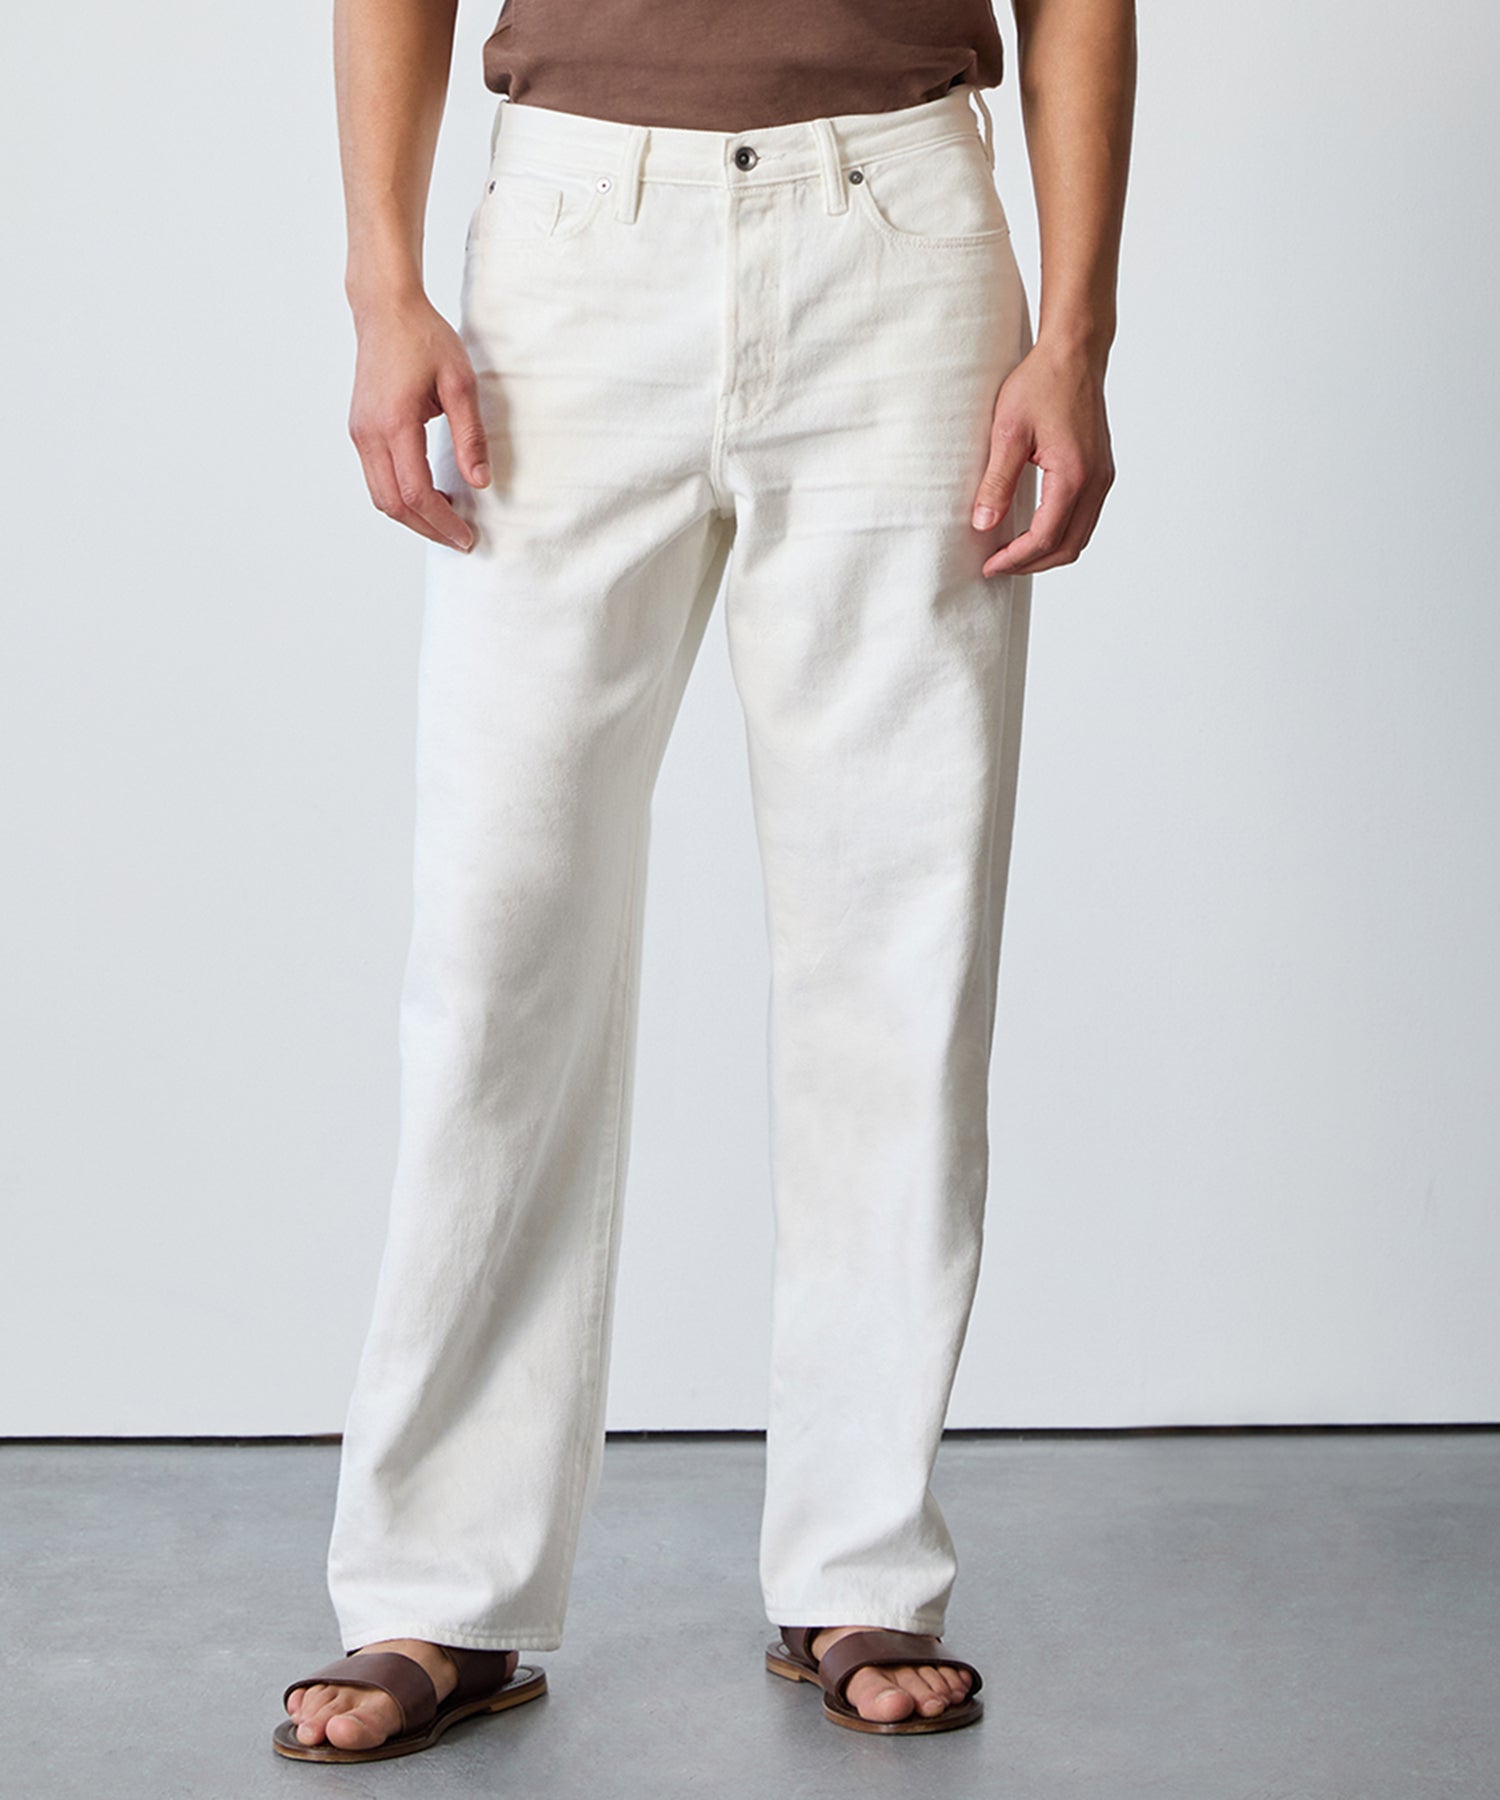 Relaxed Selvedge in White Wash